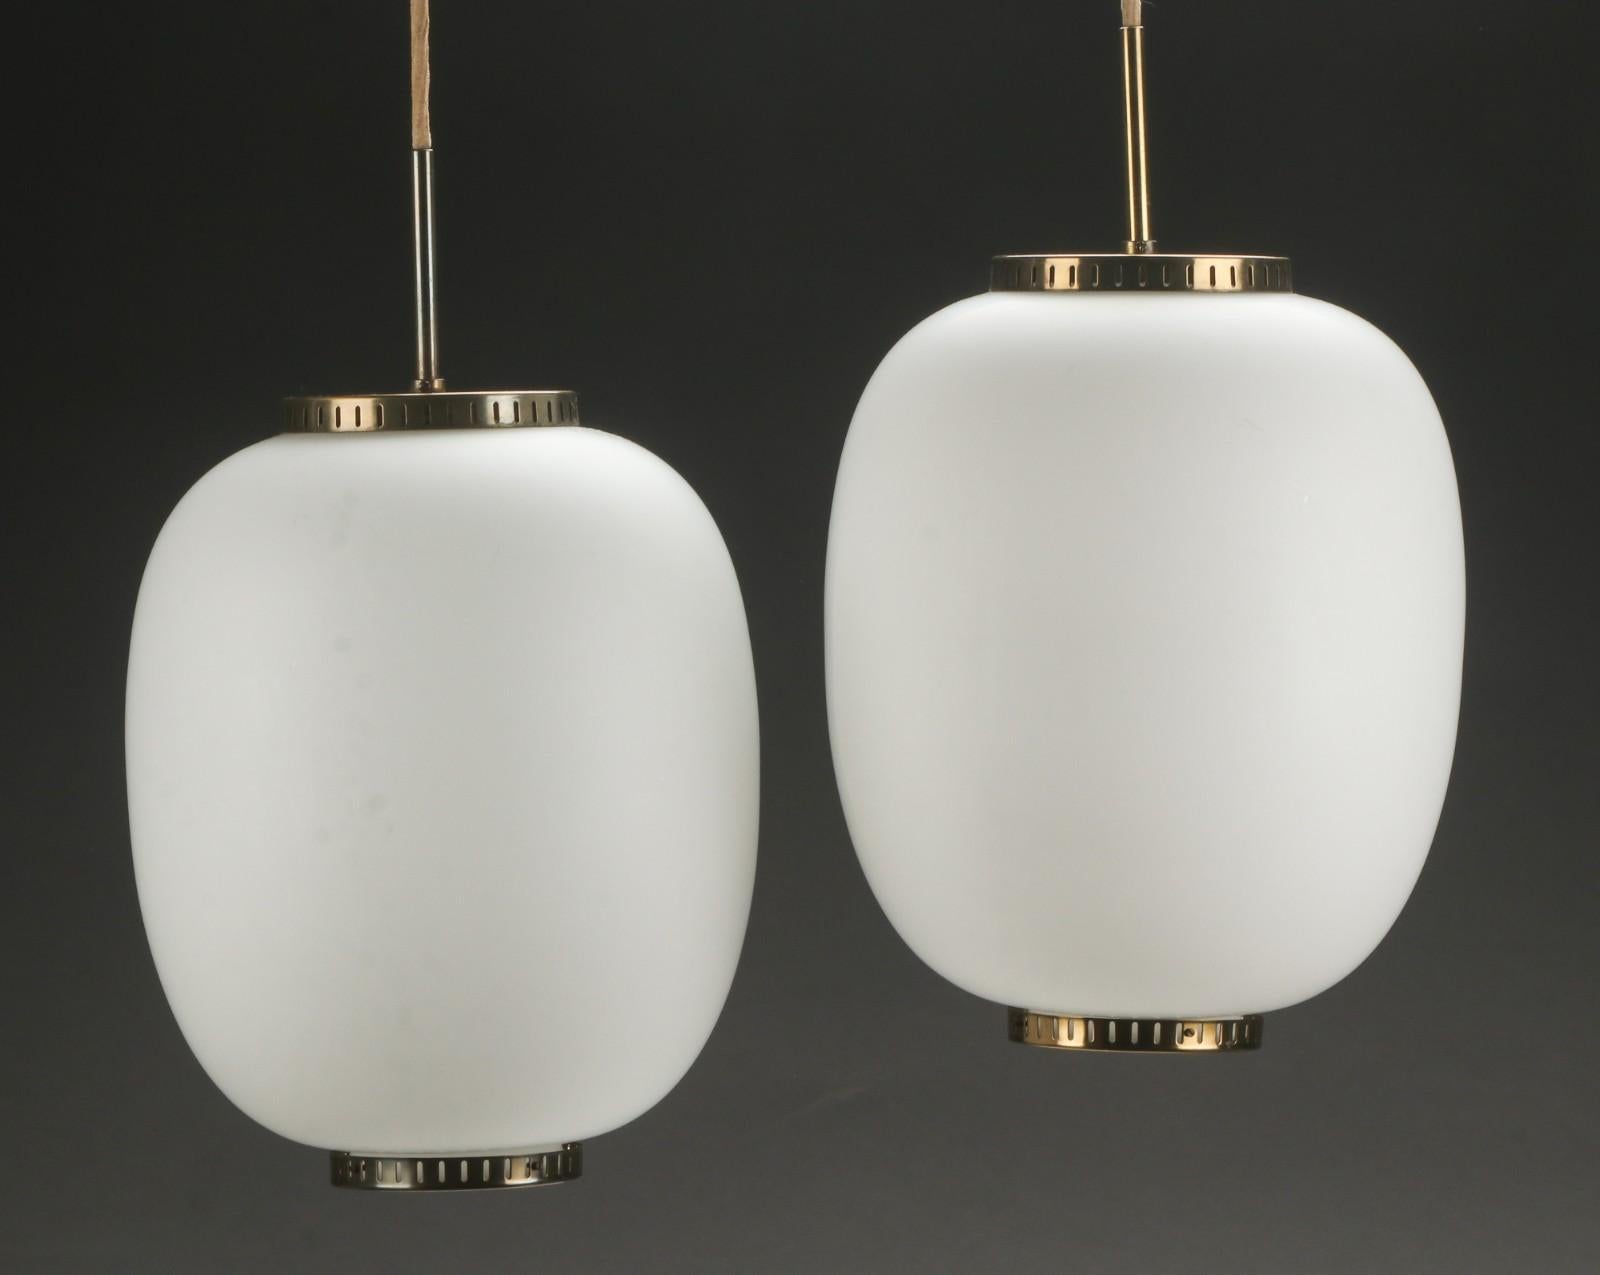 Bent Karlby. China lamp in white opal glass, brass mounting, frosted glass blind shade. 1960s. 
Produced by Lyfa. 
Good used condition with new fabric cord.
E27 Bulb rewired and functional less.